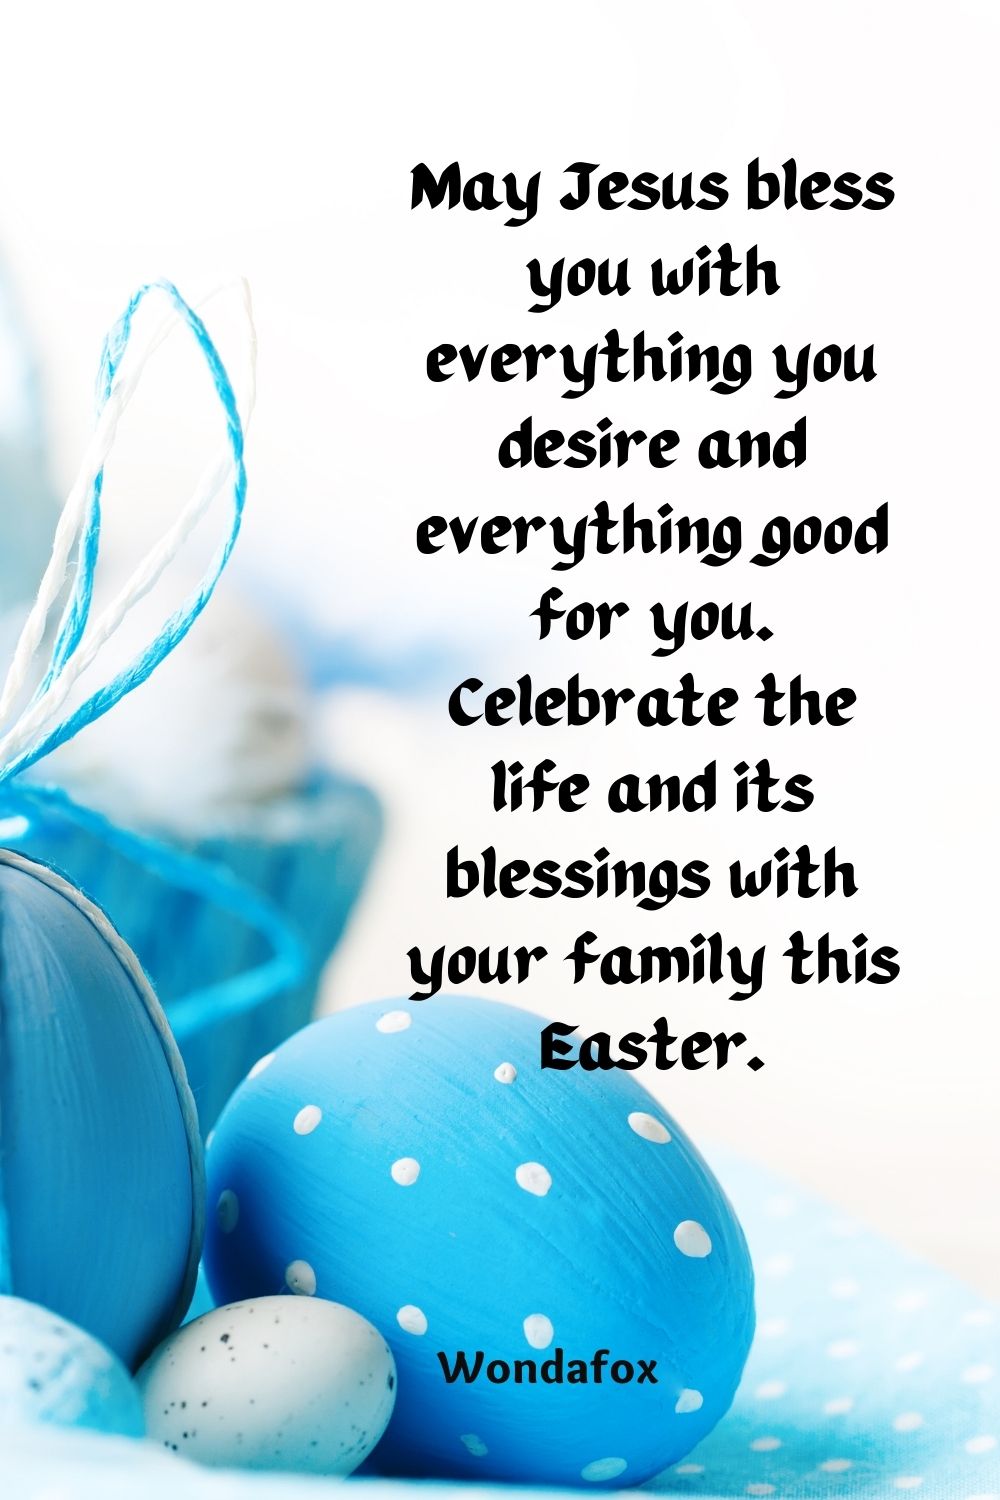 May Jesus bless you with everything you desire and everything good for you. Celebrate the life and its blessings with your family this Easter.